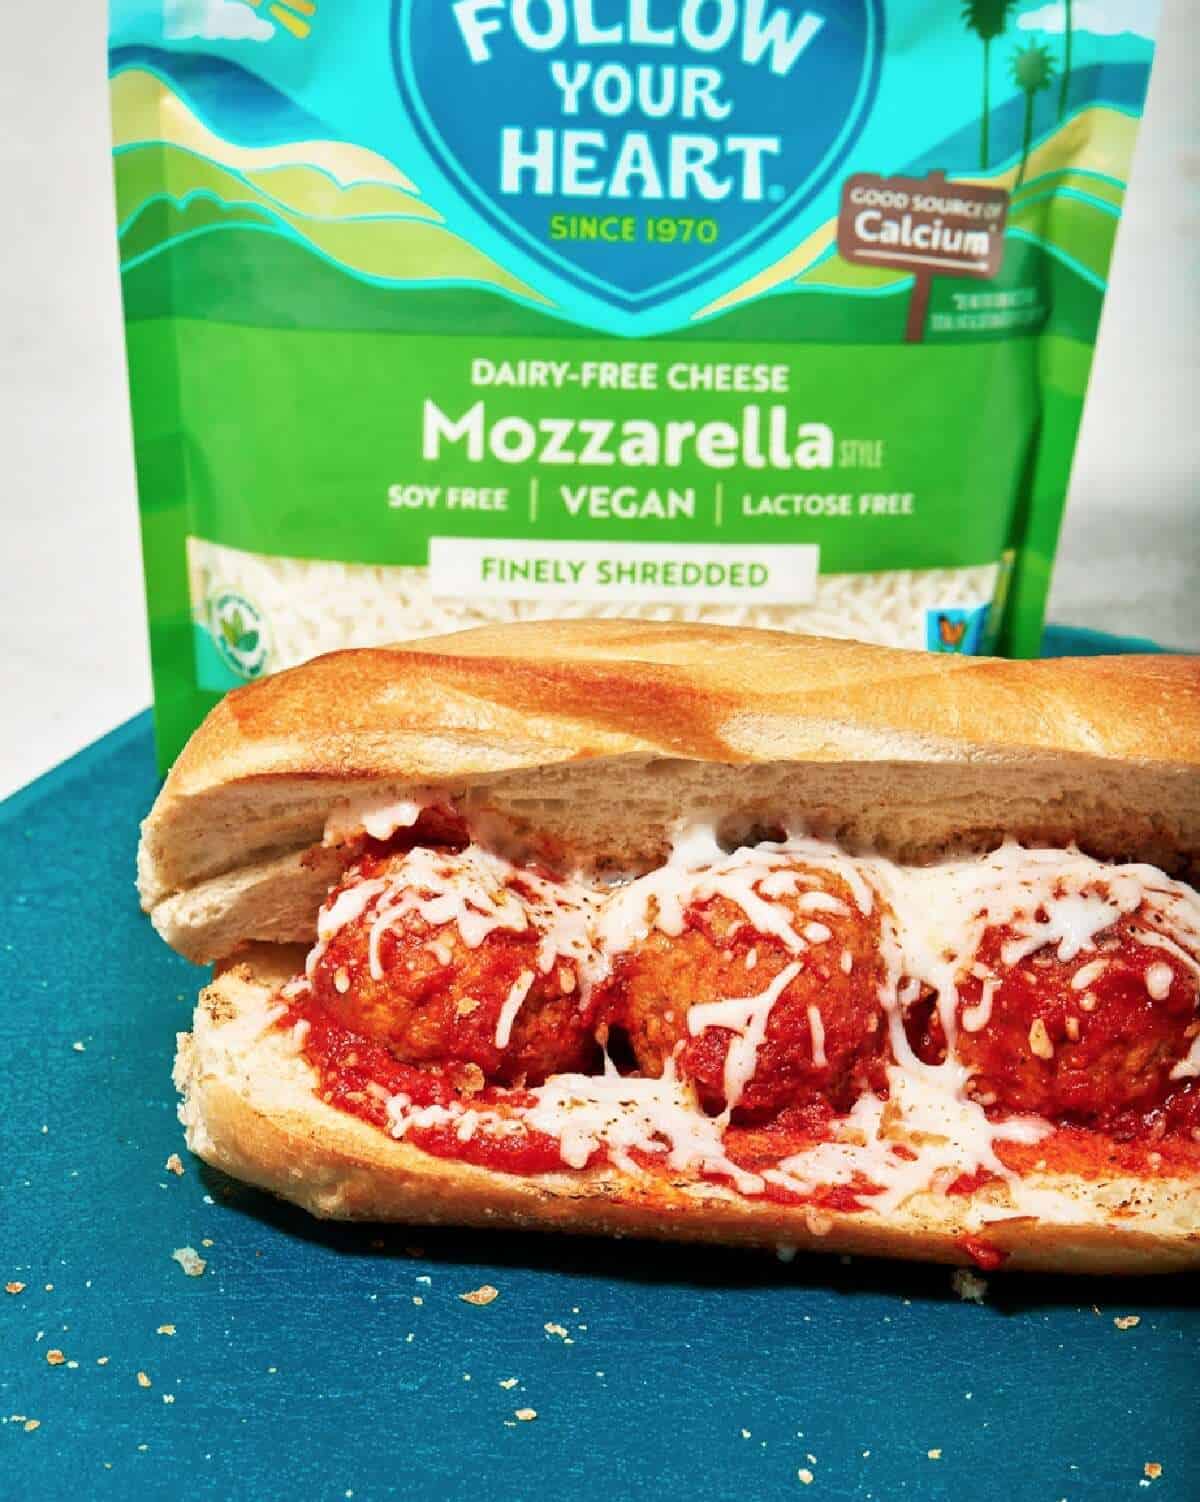 A green and blue pouch of Follow Your Heart mozzarella cheese and a vegan meatball sub on a blue countertop. 